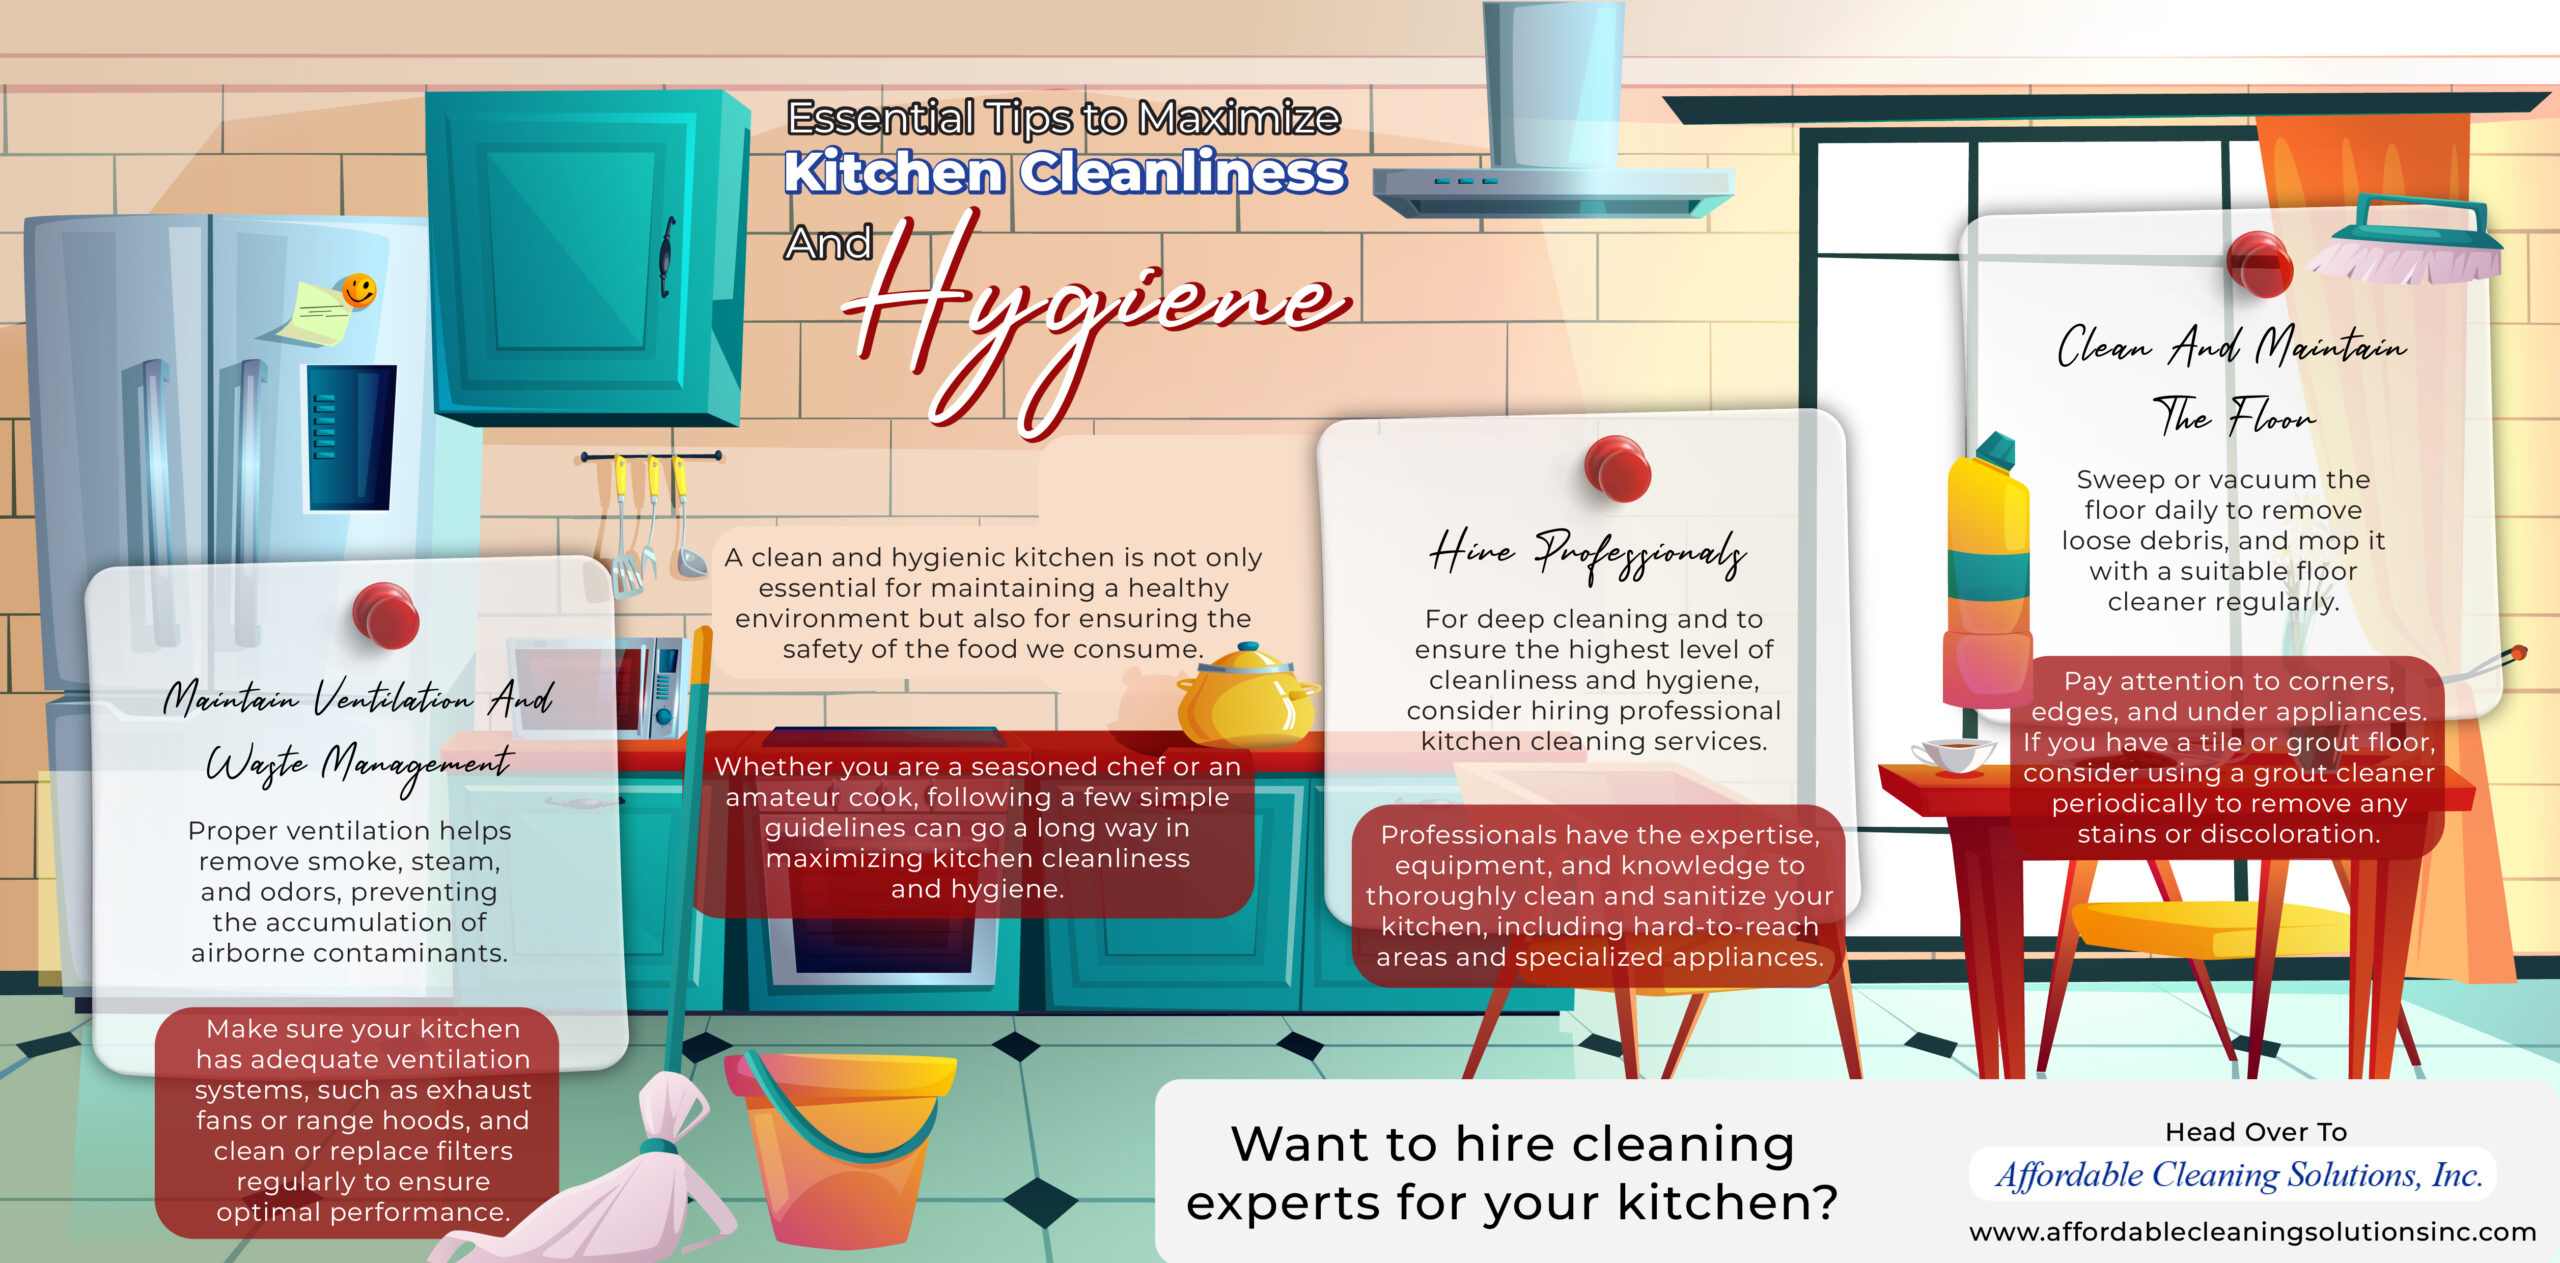 Essential Tips To Maximize Kitchen Cleanliness and Hygiene